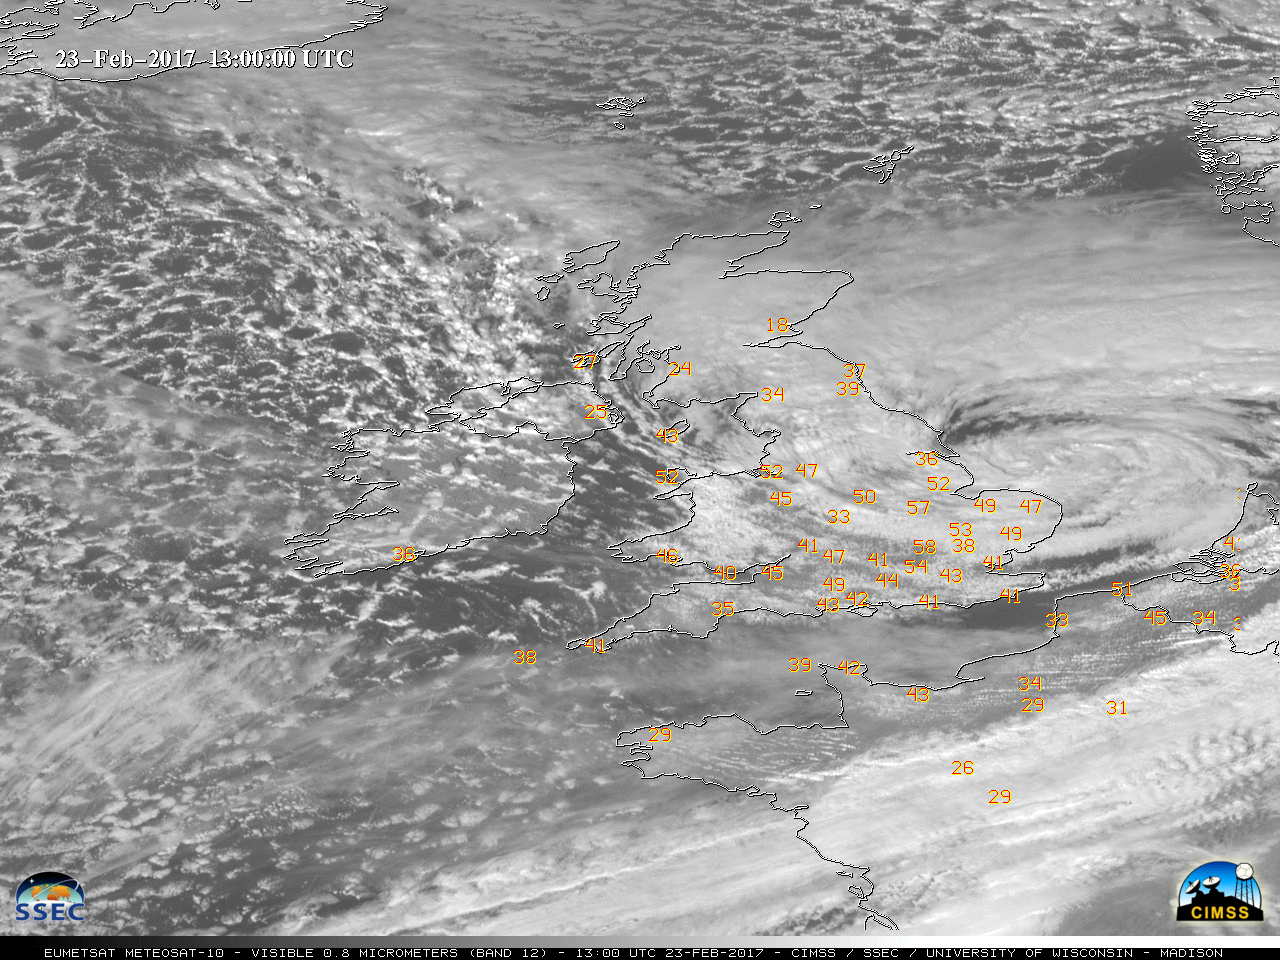 Meteosat-10 High Resolution Visible (0.8 µm) images, with hourly surface wind gusts in knots [click to play animation]